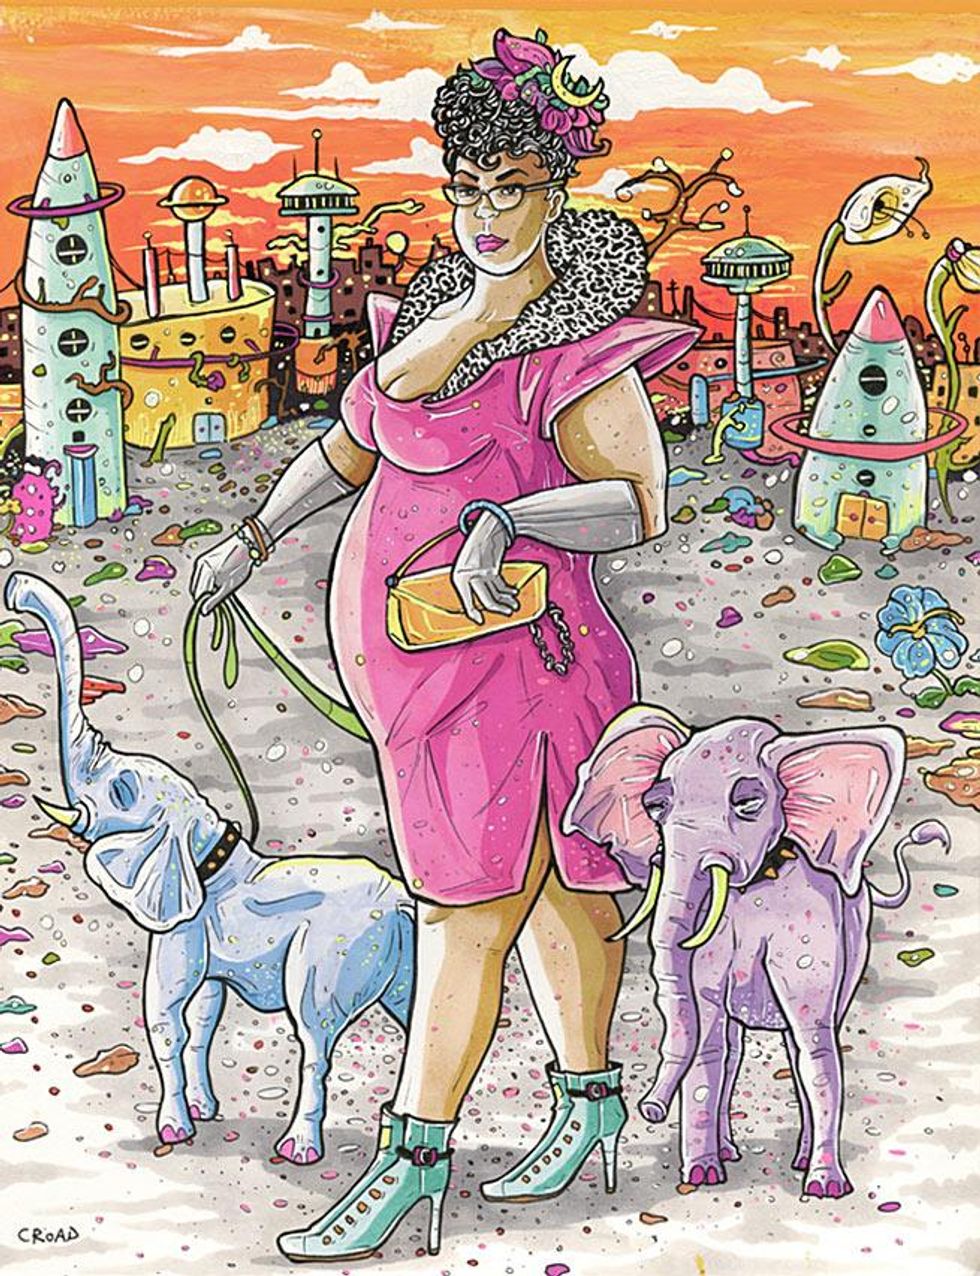 Cristy C. Road\u2019s Tarot Deck for the Next World